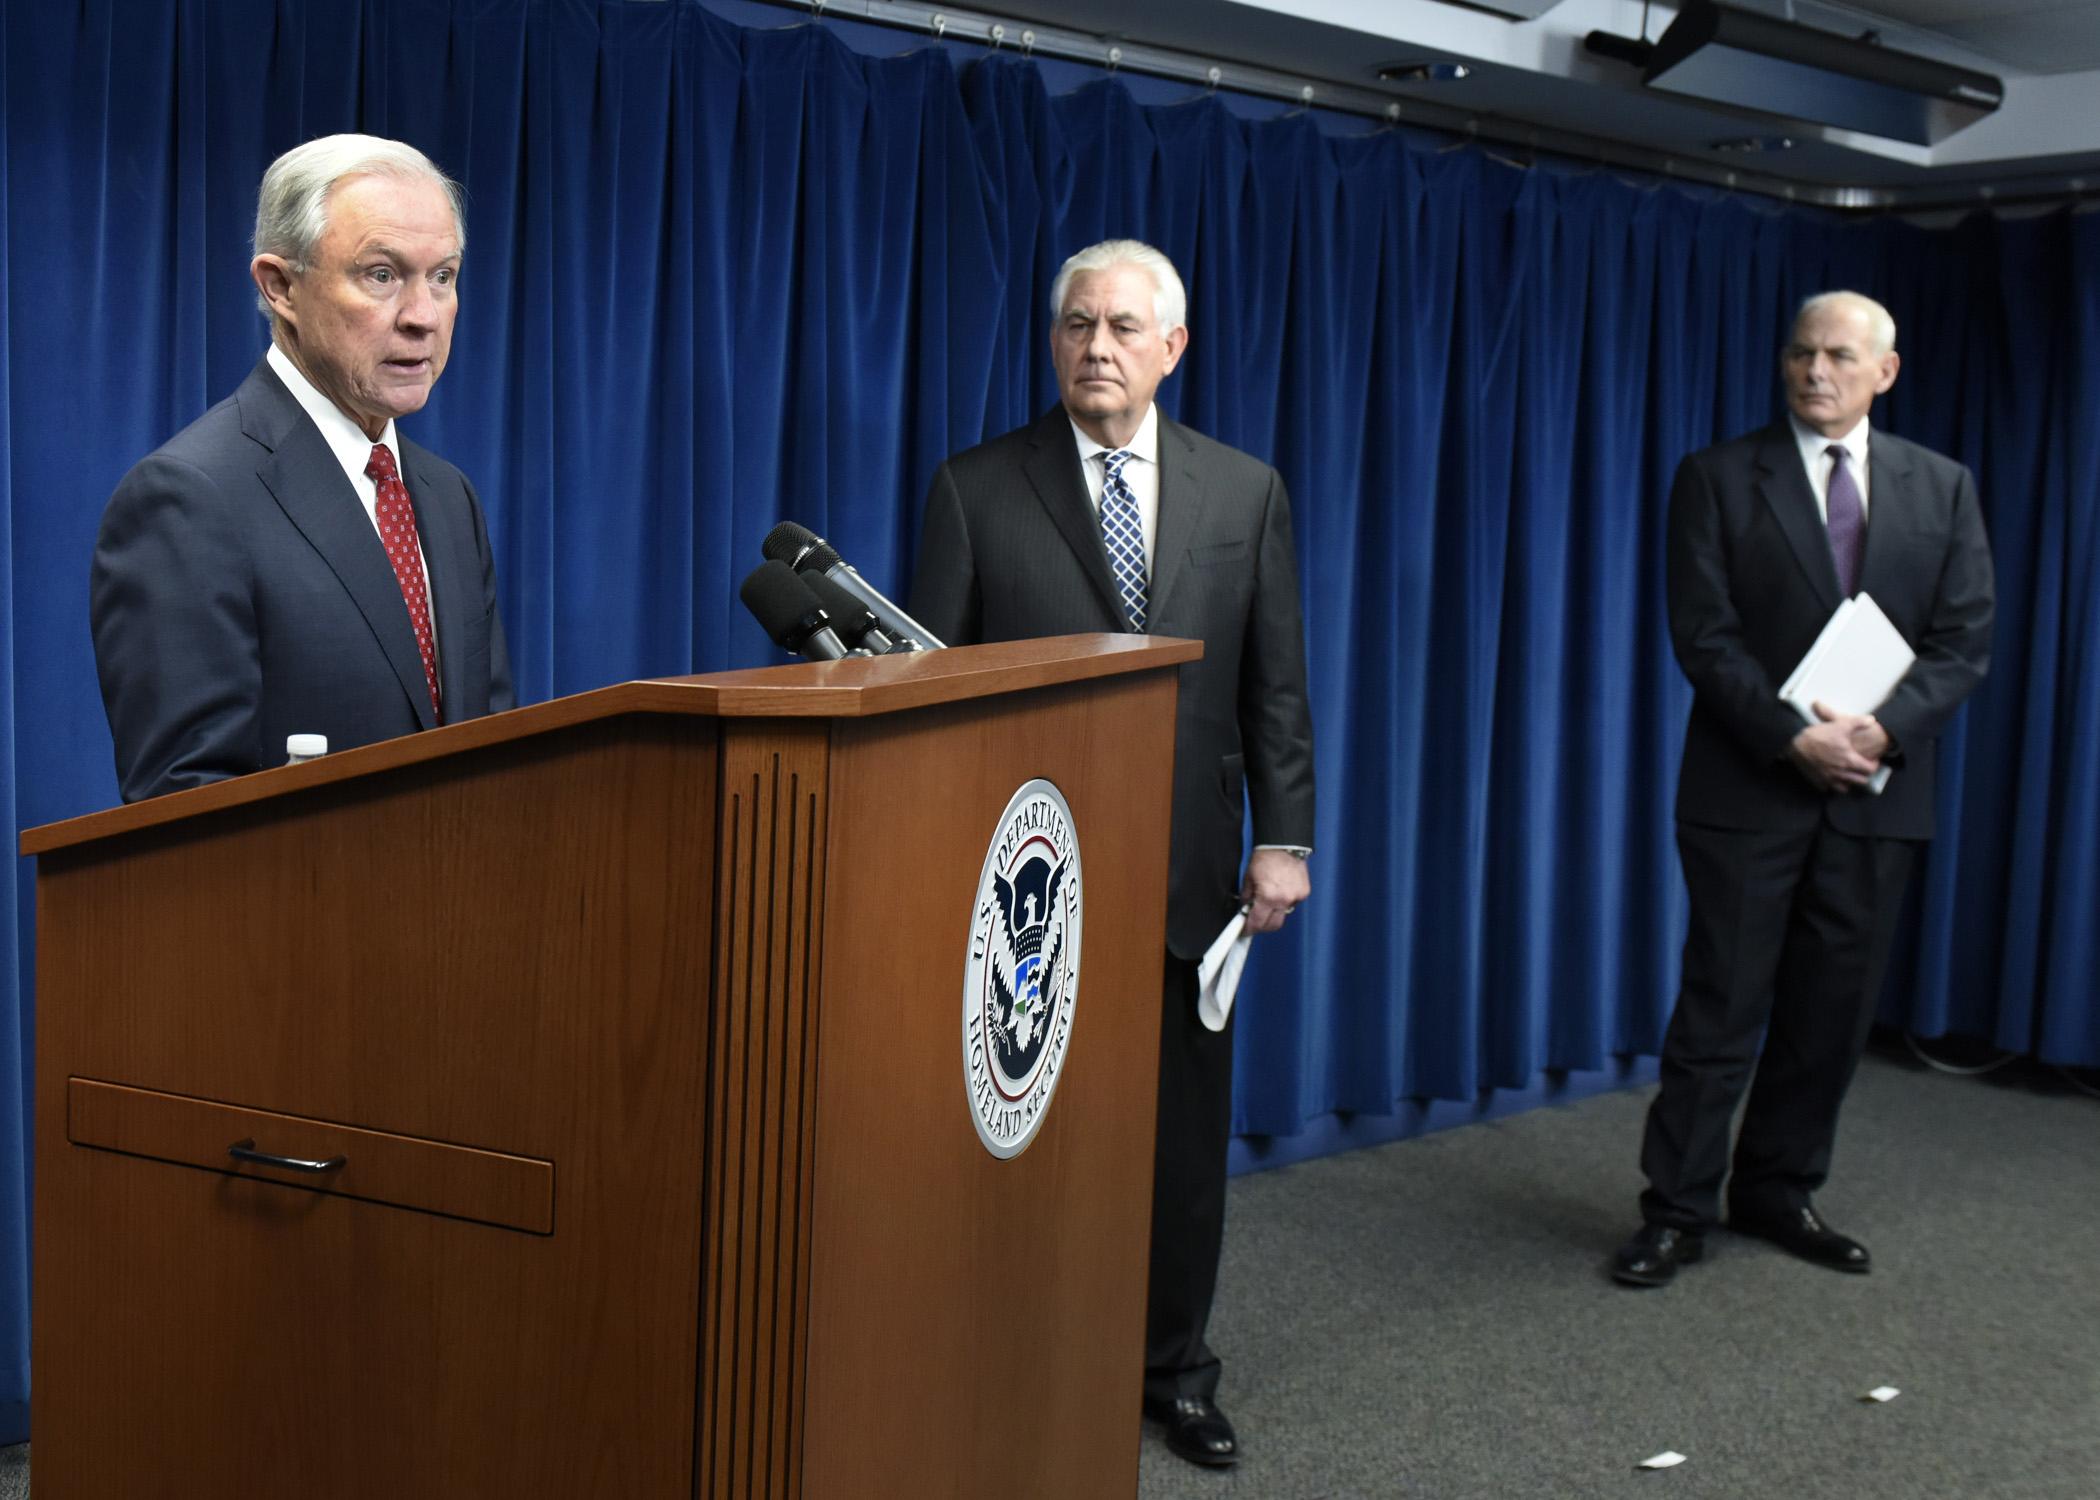 Attorney General Jeff Sessions stands behind podium at a press conference. Secretary of State Rex Tillerson and Secretary of Homeland Security John Kelly are looking towards him from the side.